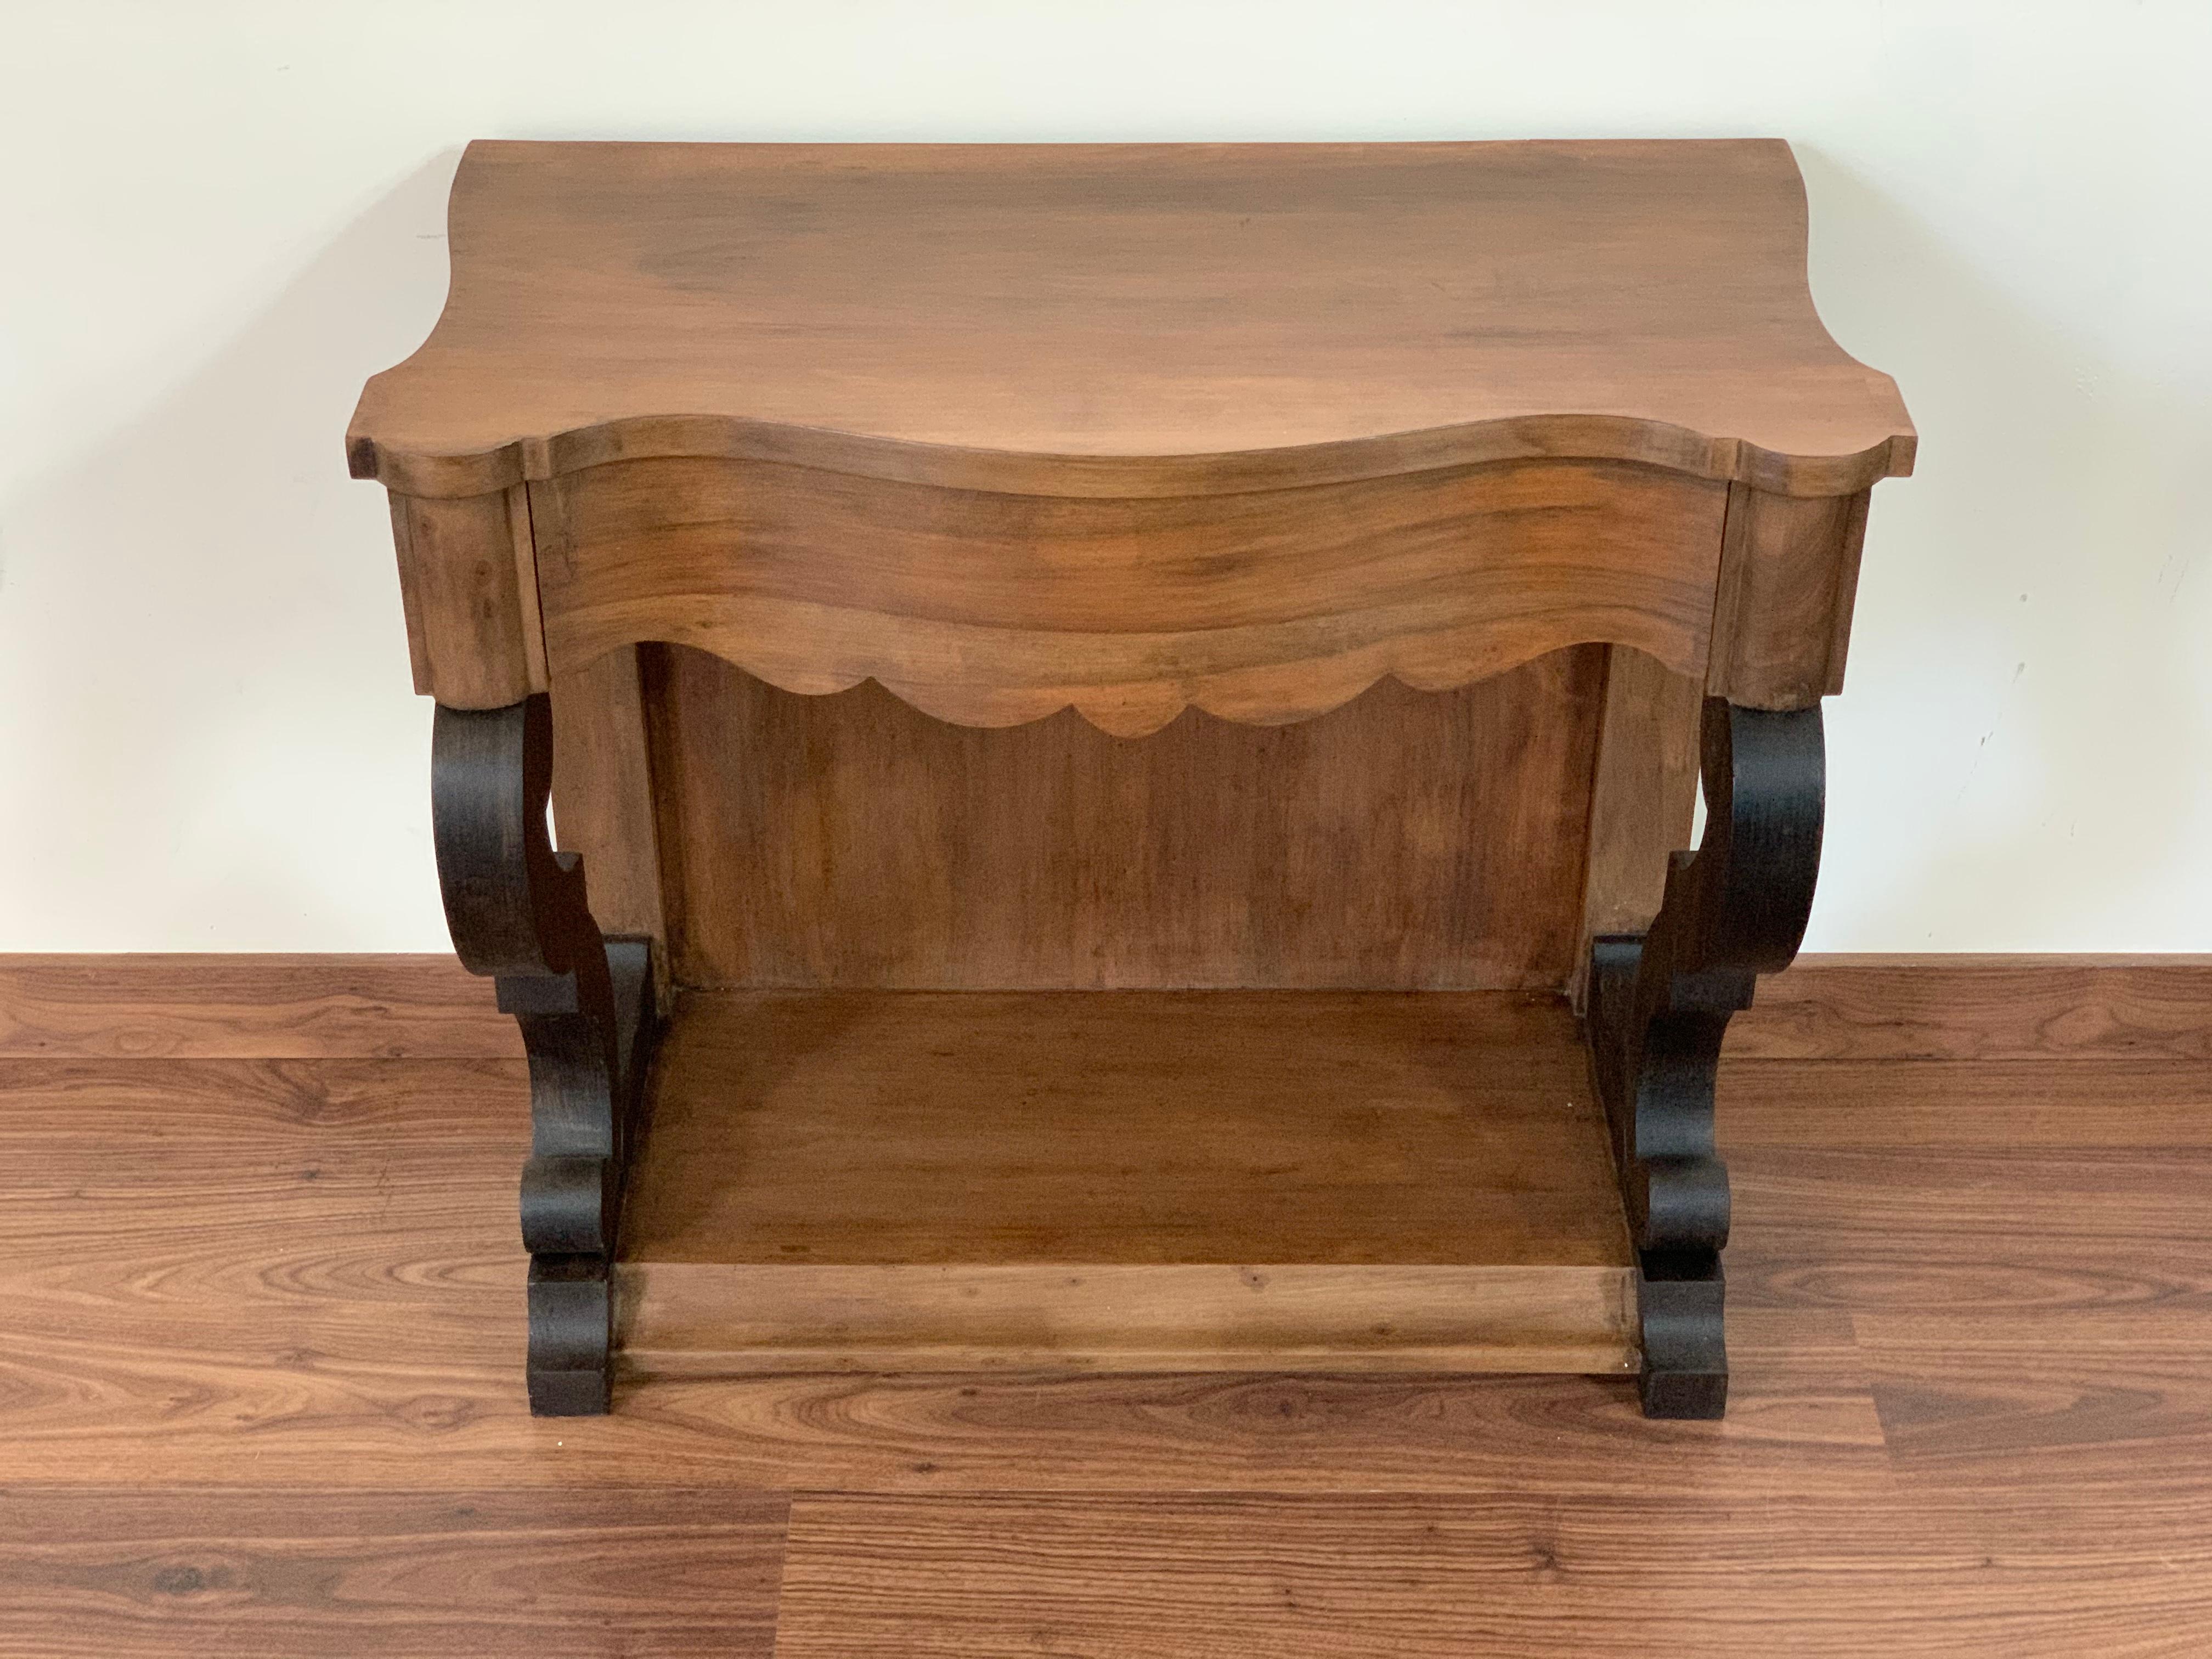 19th century low pair of console tables or nightstands in mahogany
Price per item.

Low table
Console table
Nightstand
Side table
End table.